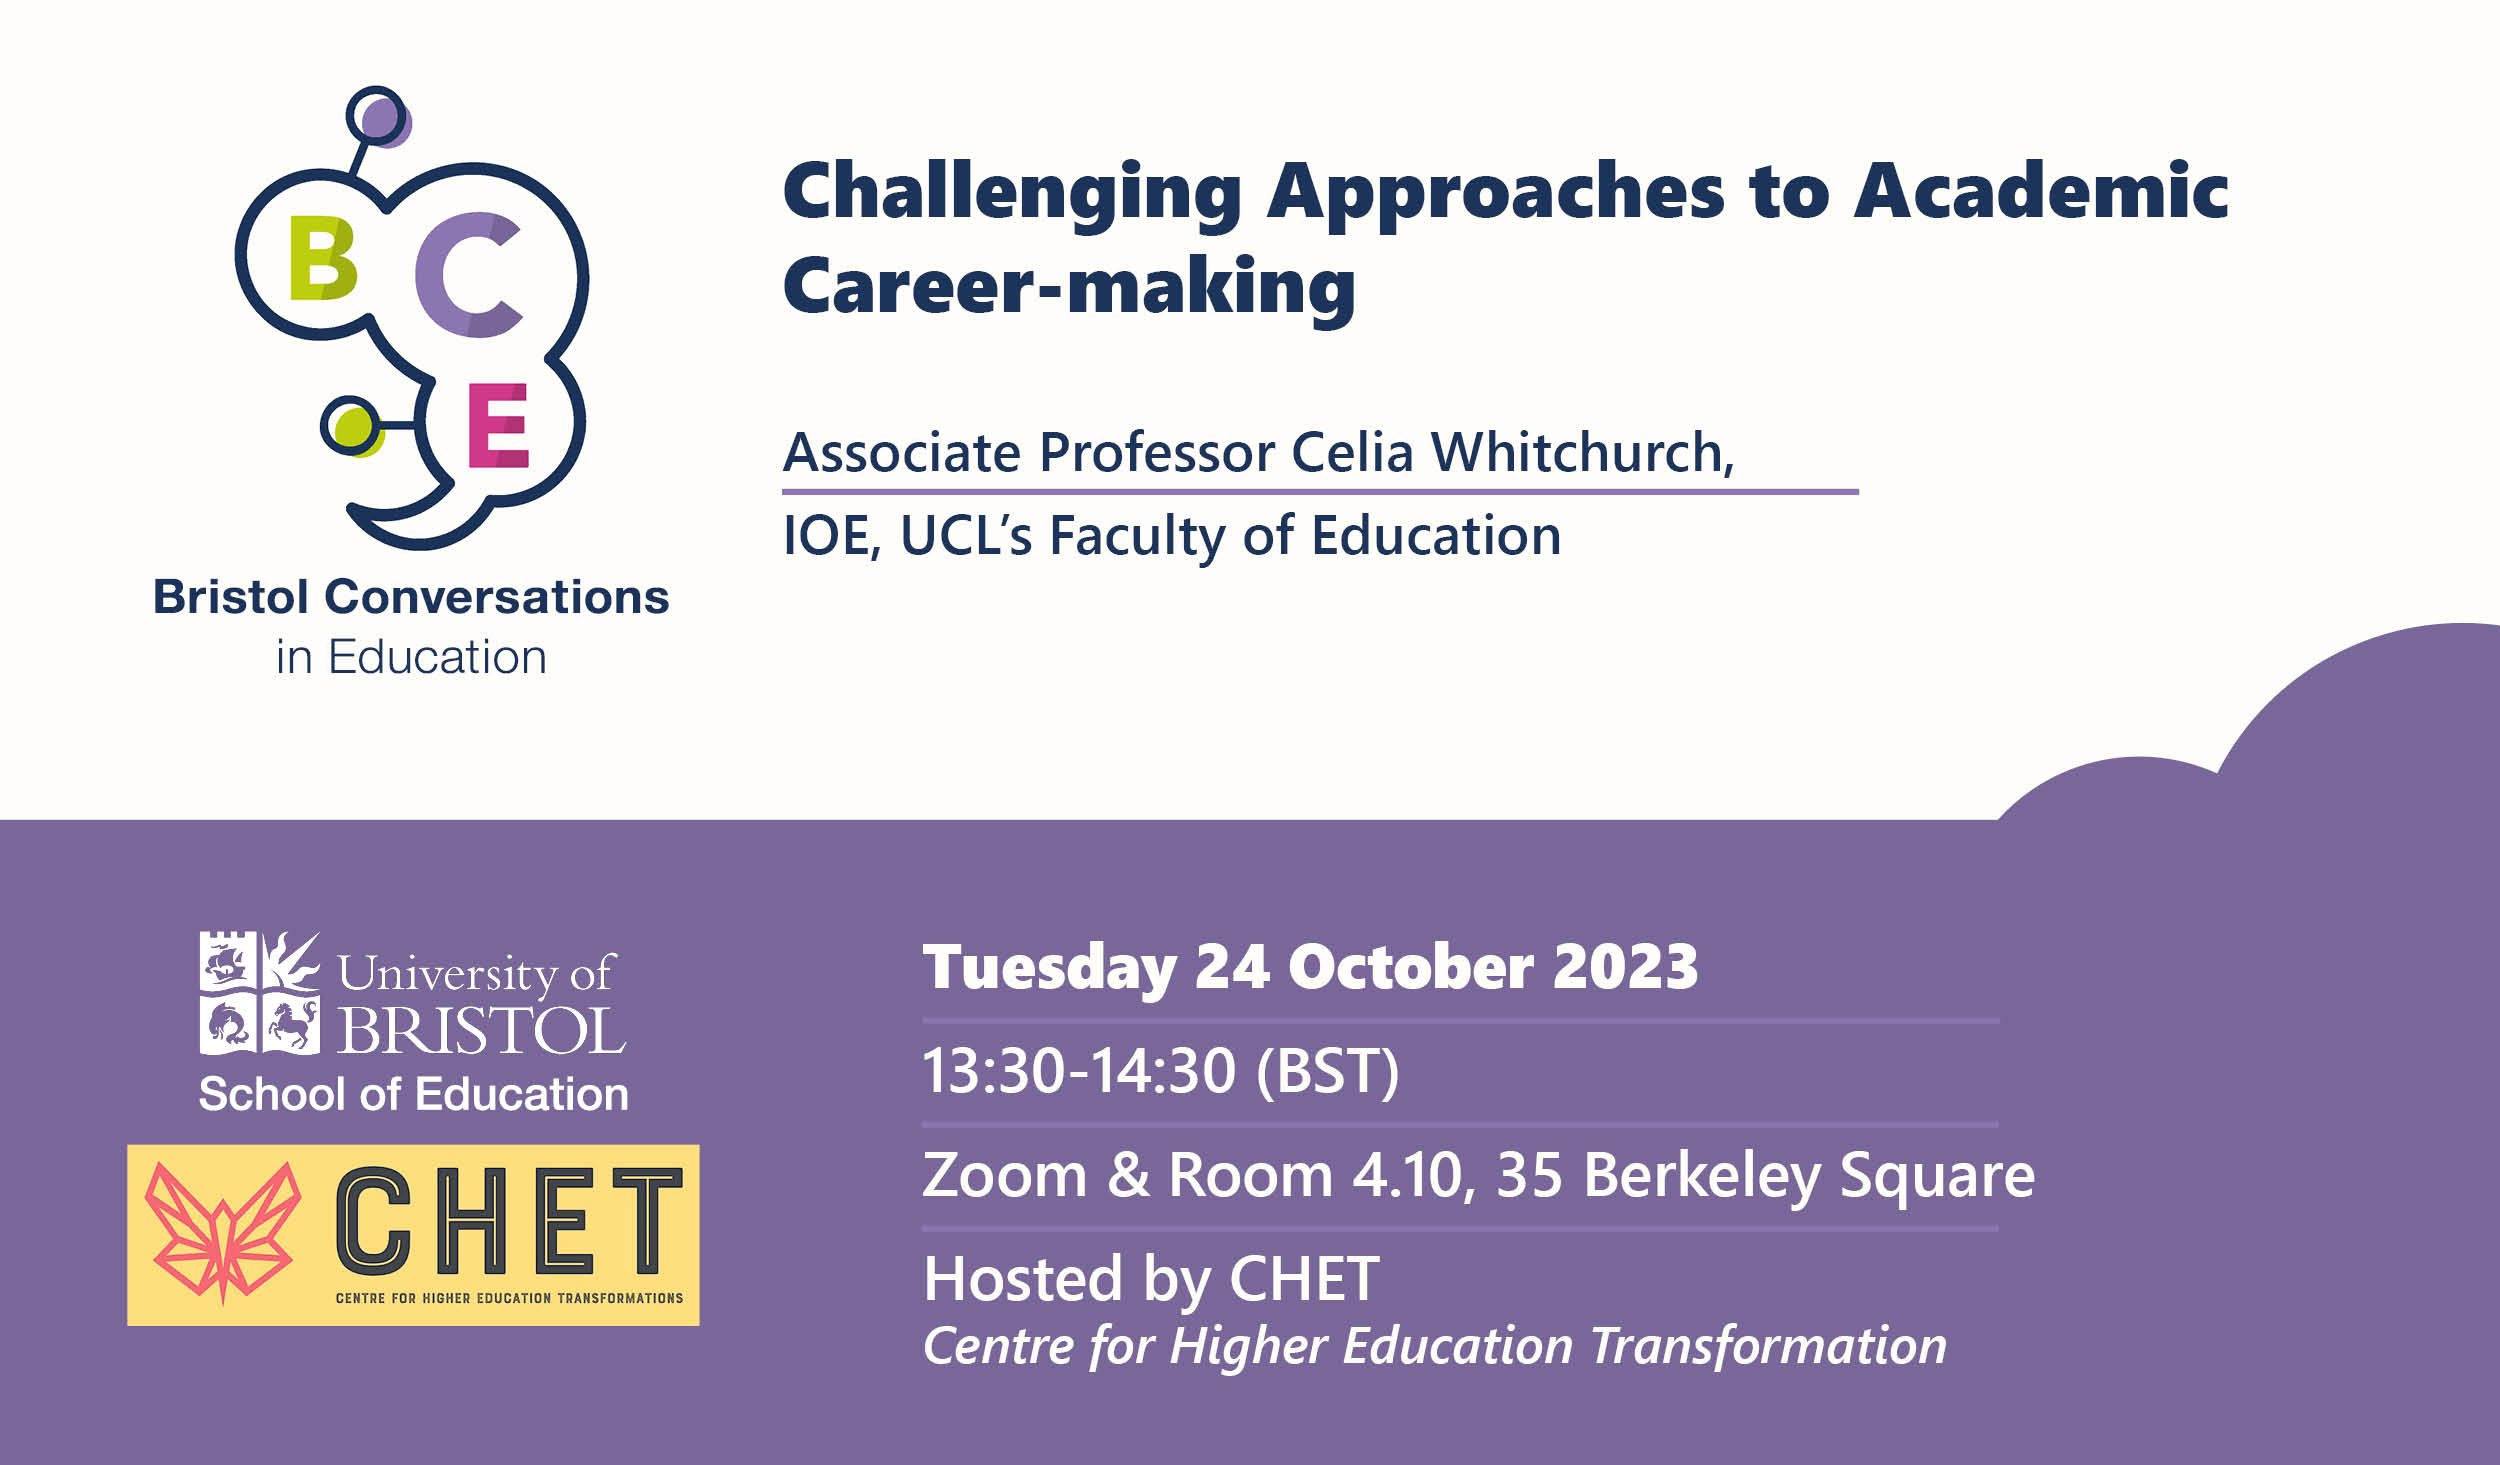 BCE: Challenging Approaches to Academic Career-making poster